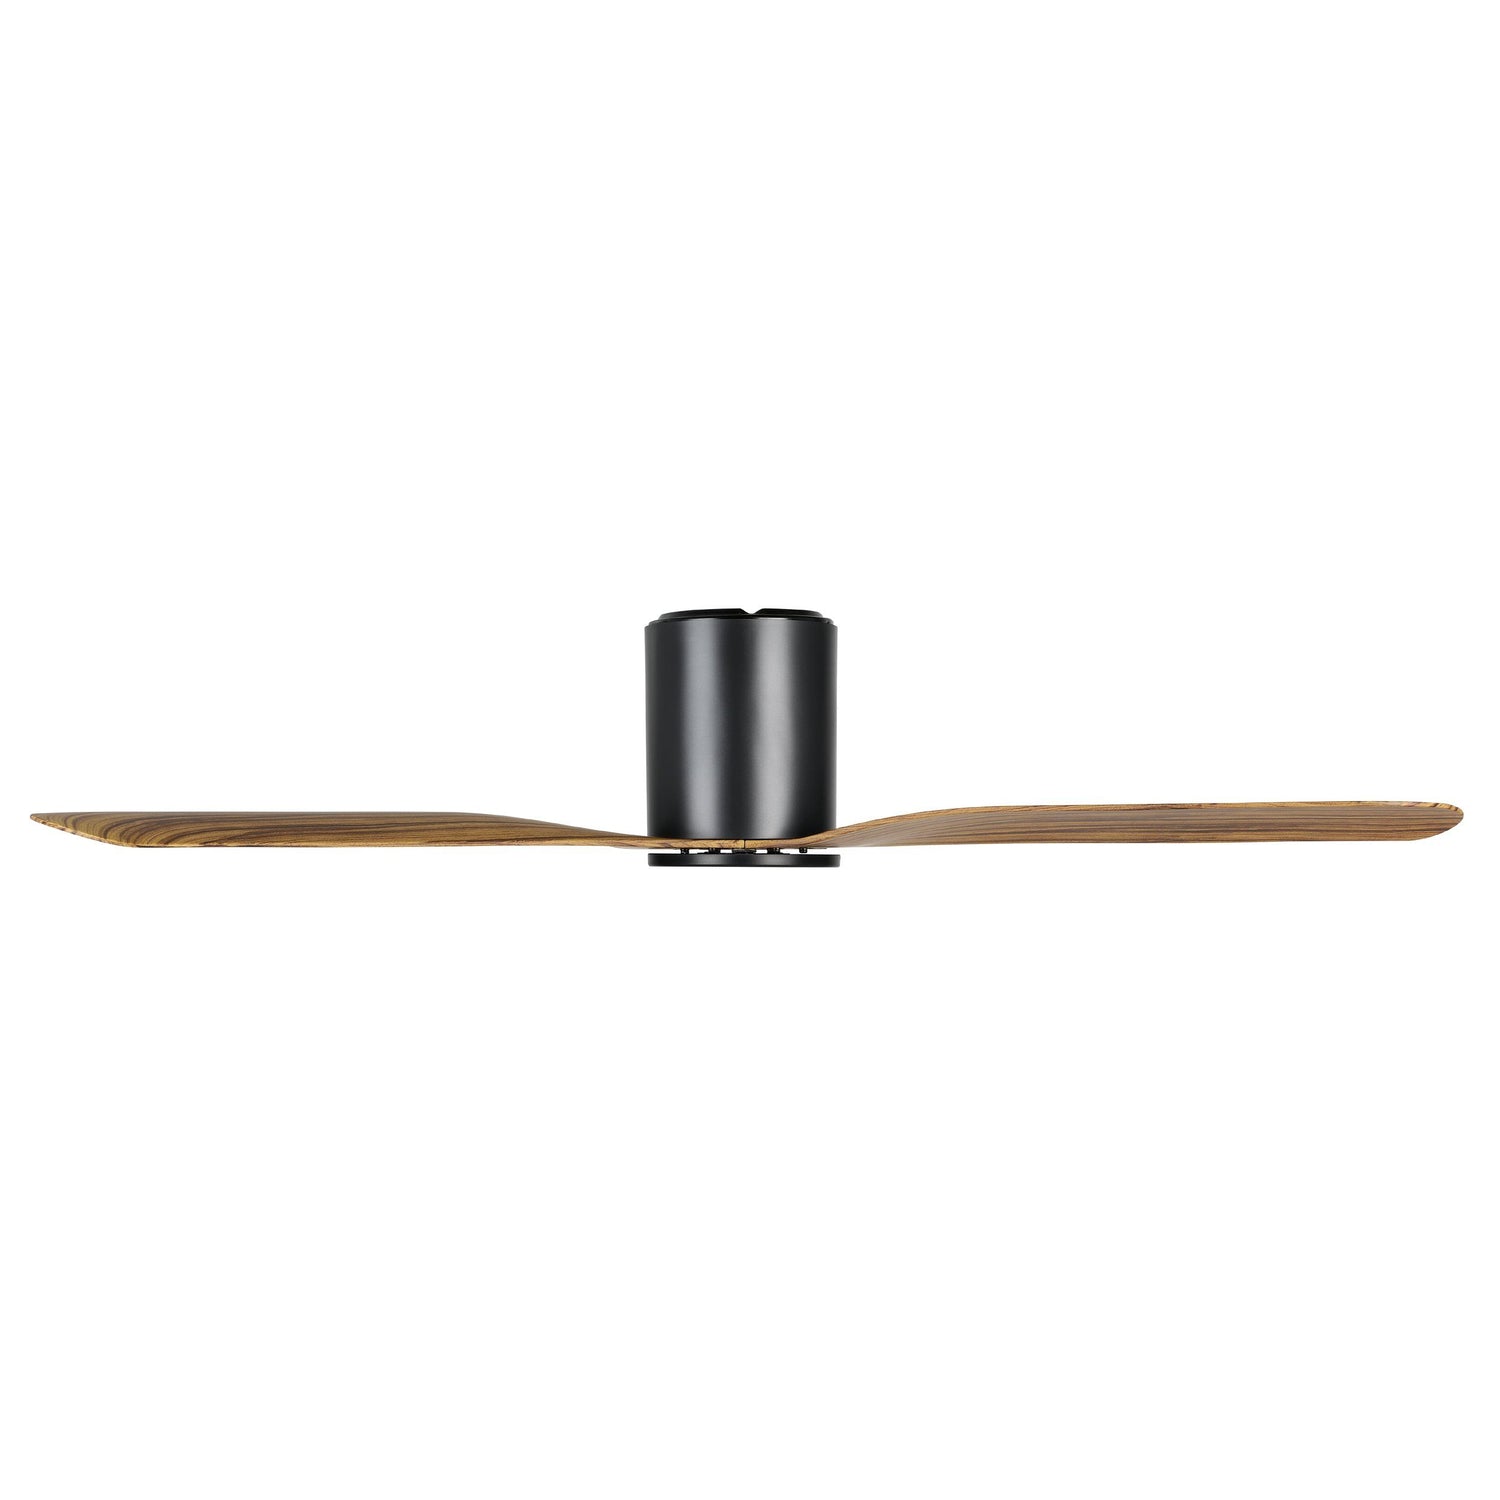 Iluka 52&quot;/1320mm Black and Rustic Timber DC Low Profile Flush Ceiling Fan